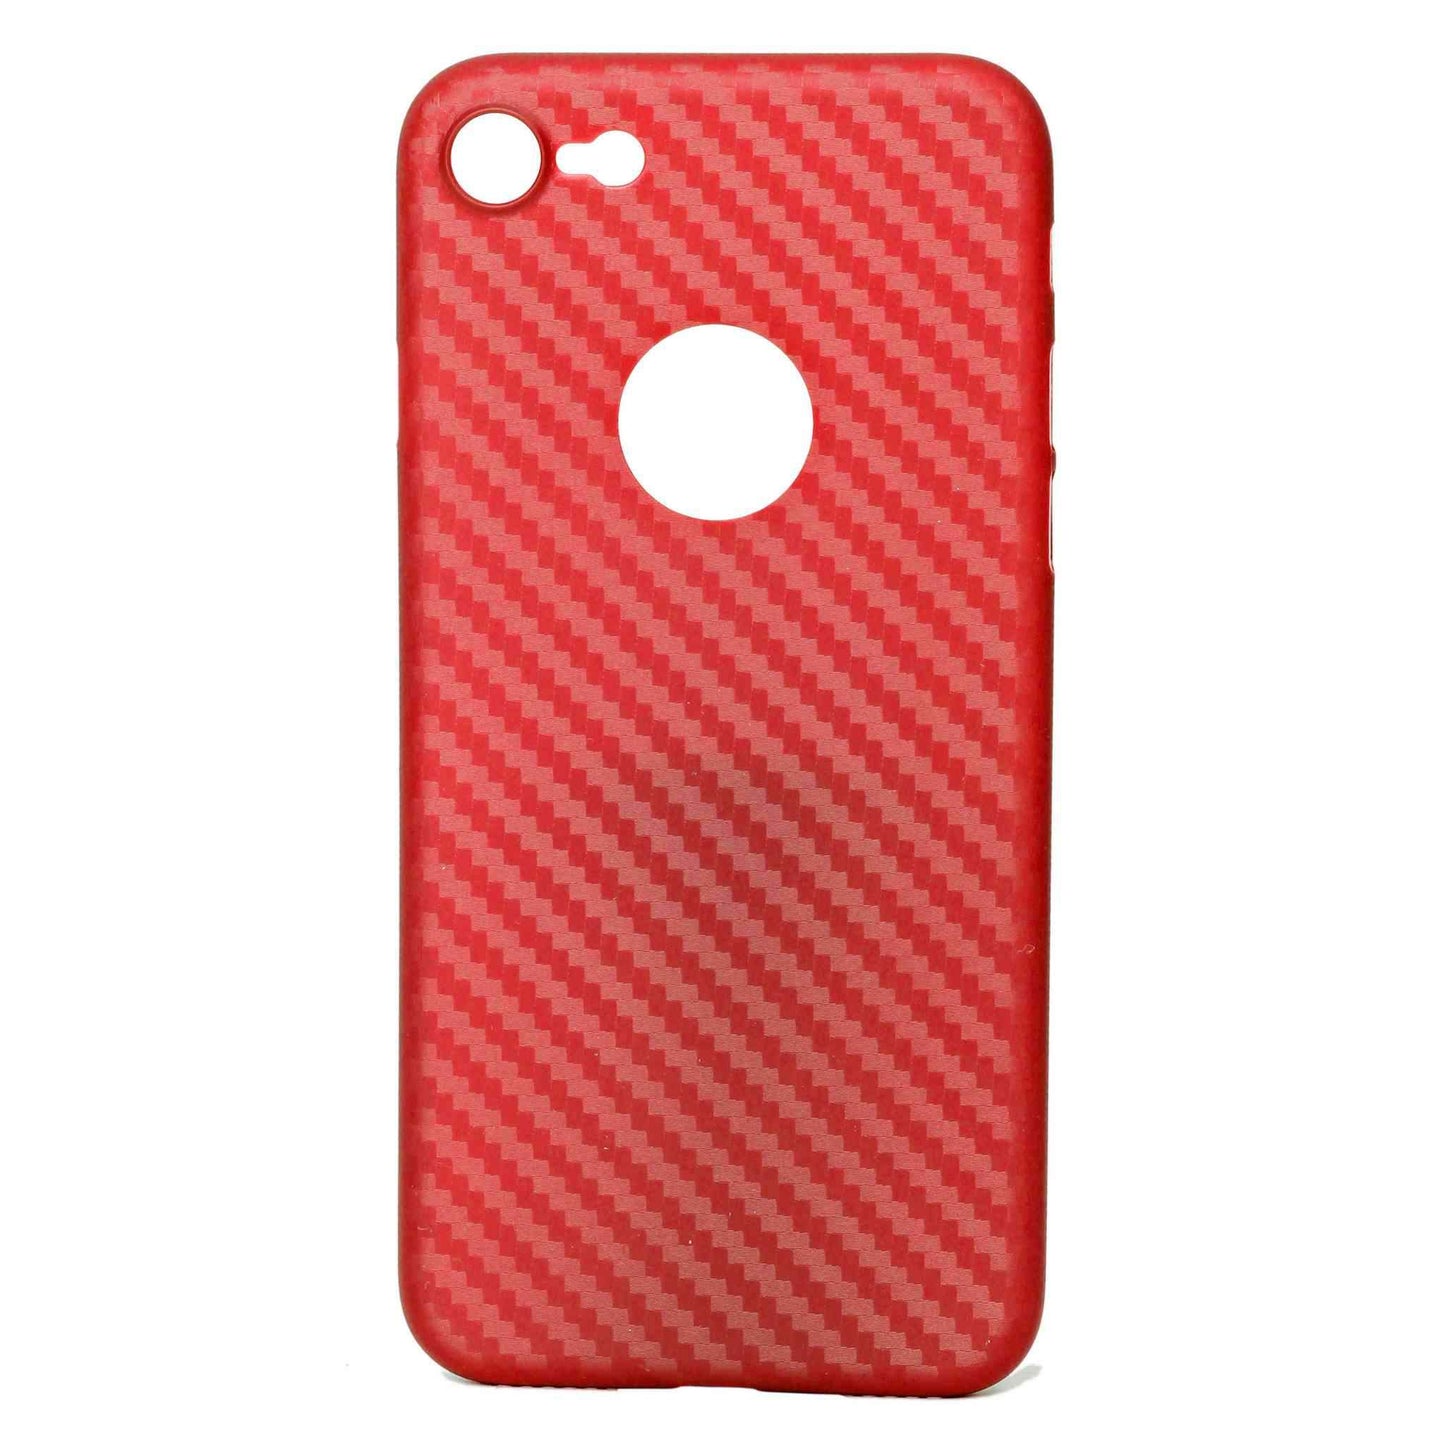 Indian Petals Polycarbonate 3D Pattern Protective Mobile Back Case Cover for Apple iPhone 7, Red - Indian Petals